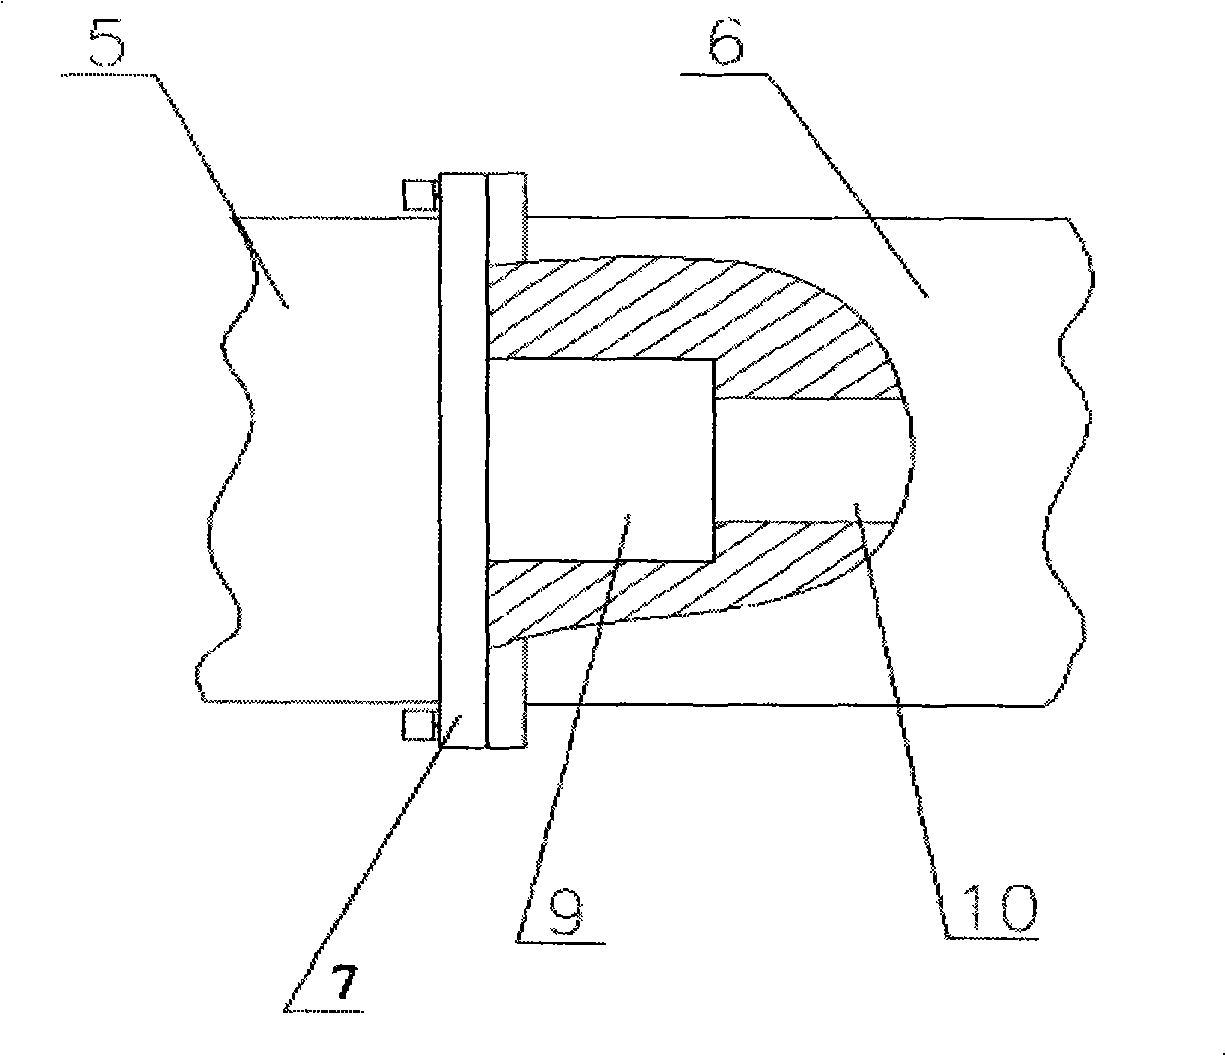 Lower-lever transmission device of double-lever vacuum extruder